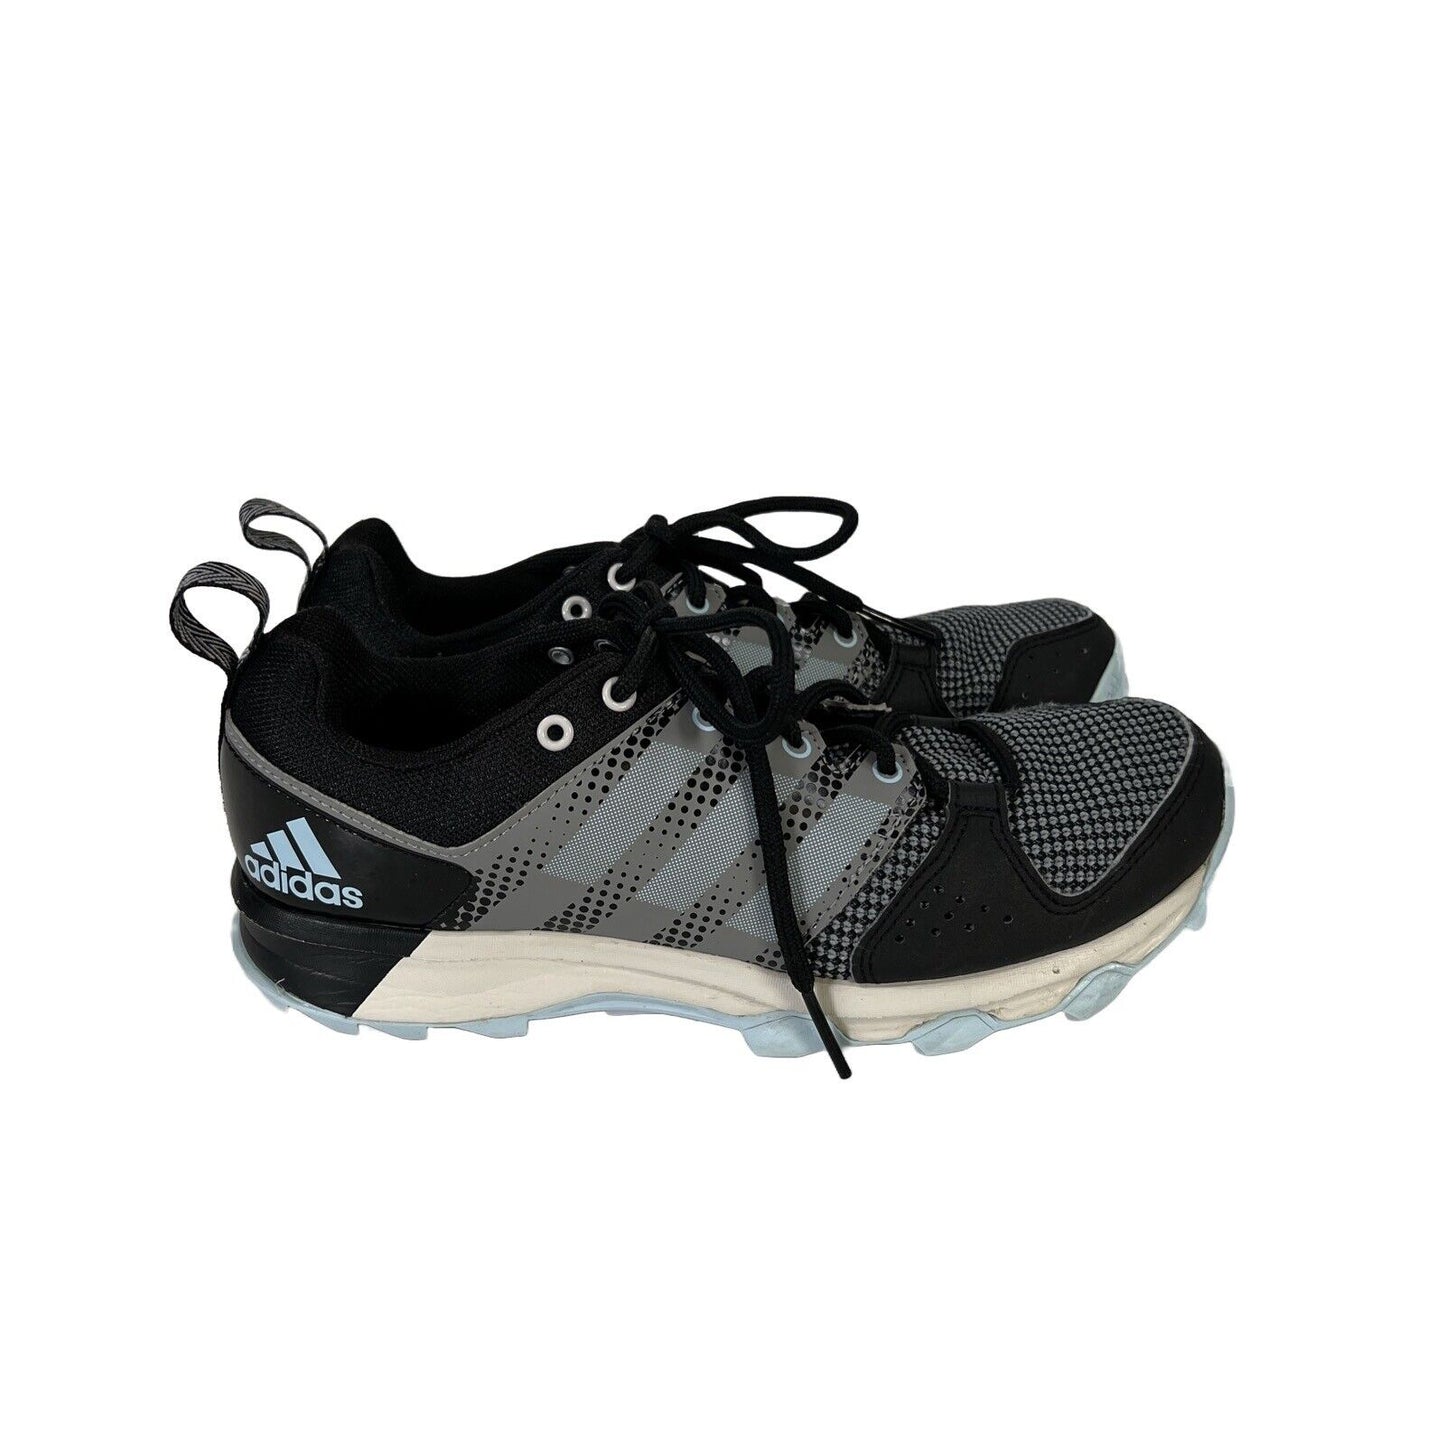 adidas Women's Black/Blue Galaxy Trail Lace Up Athletic Shoes - 7.5